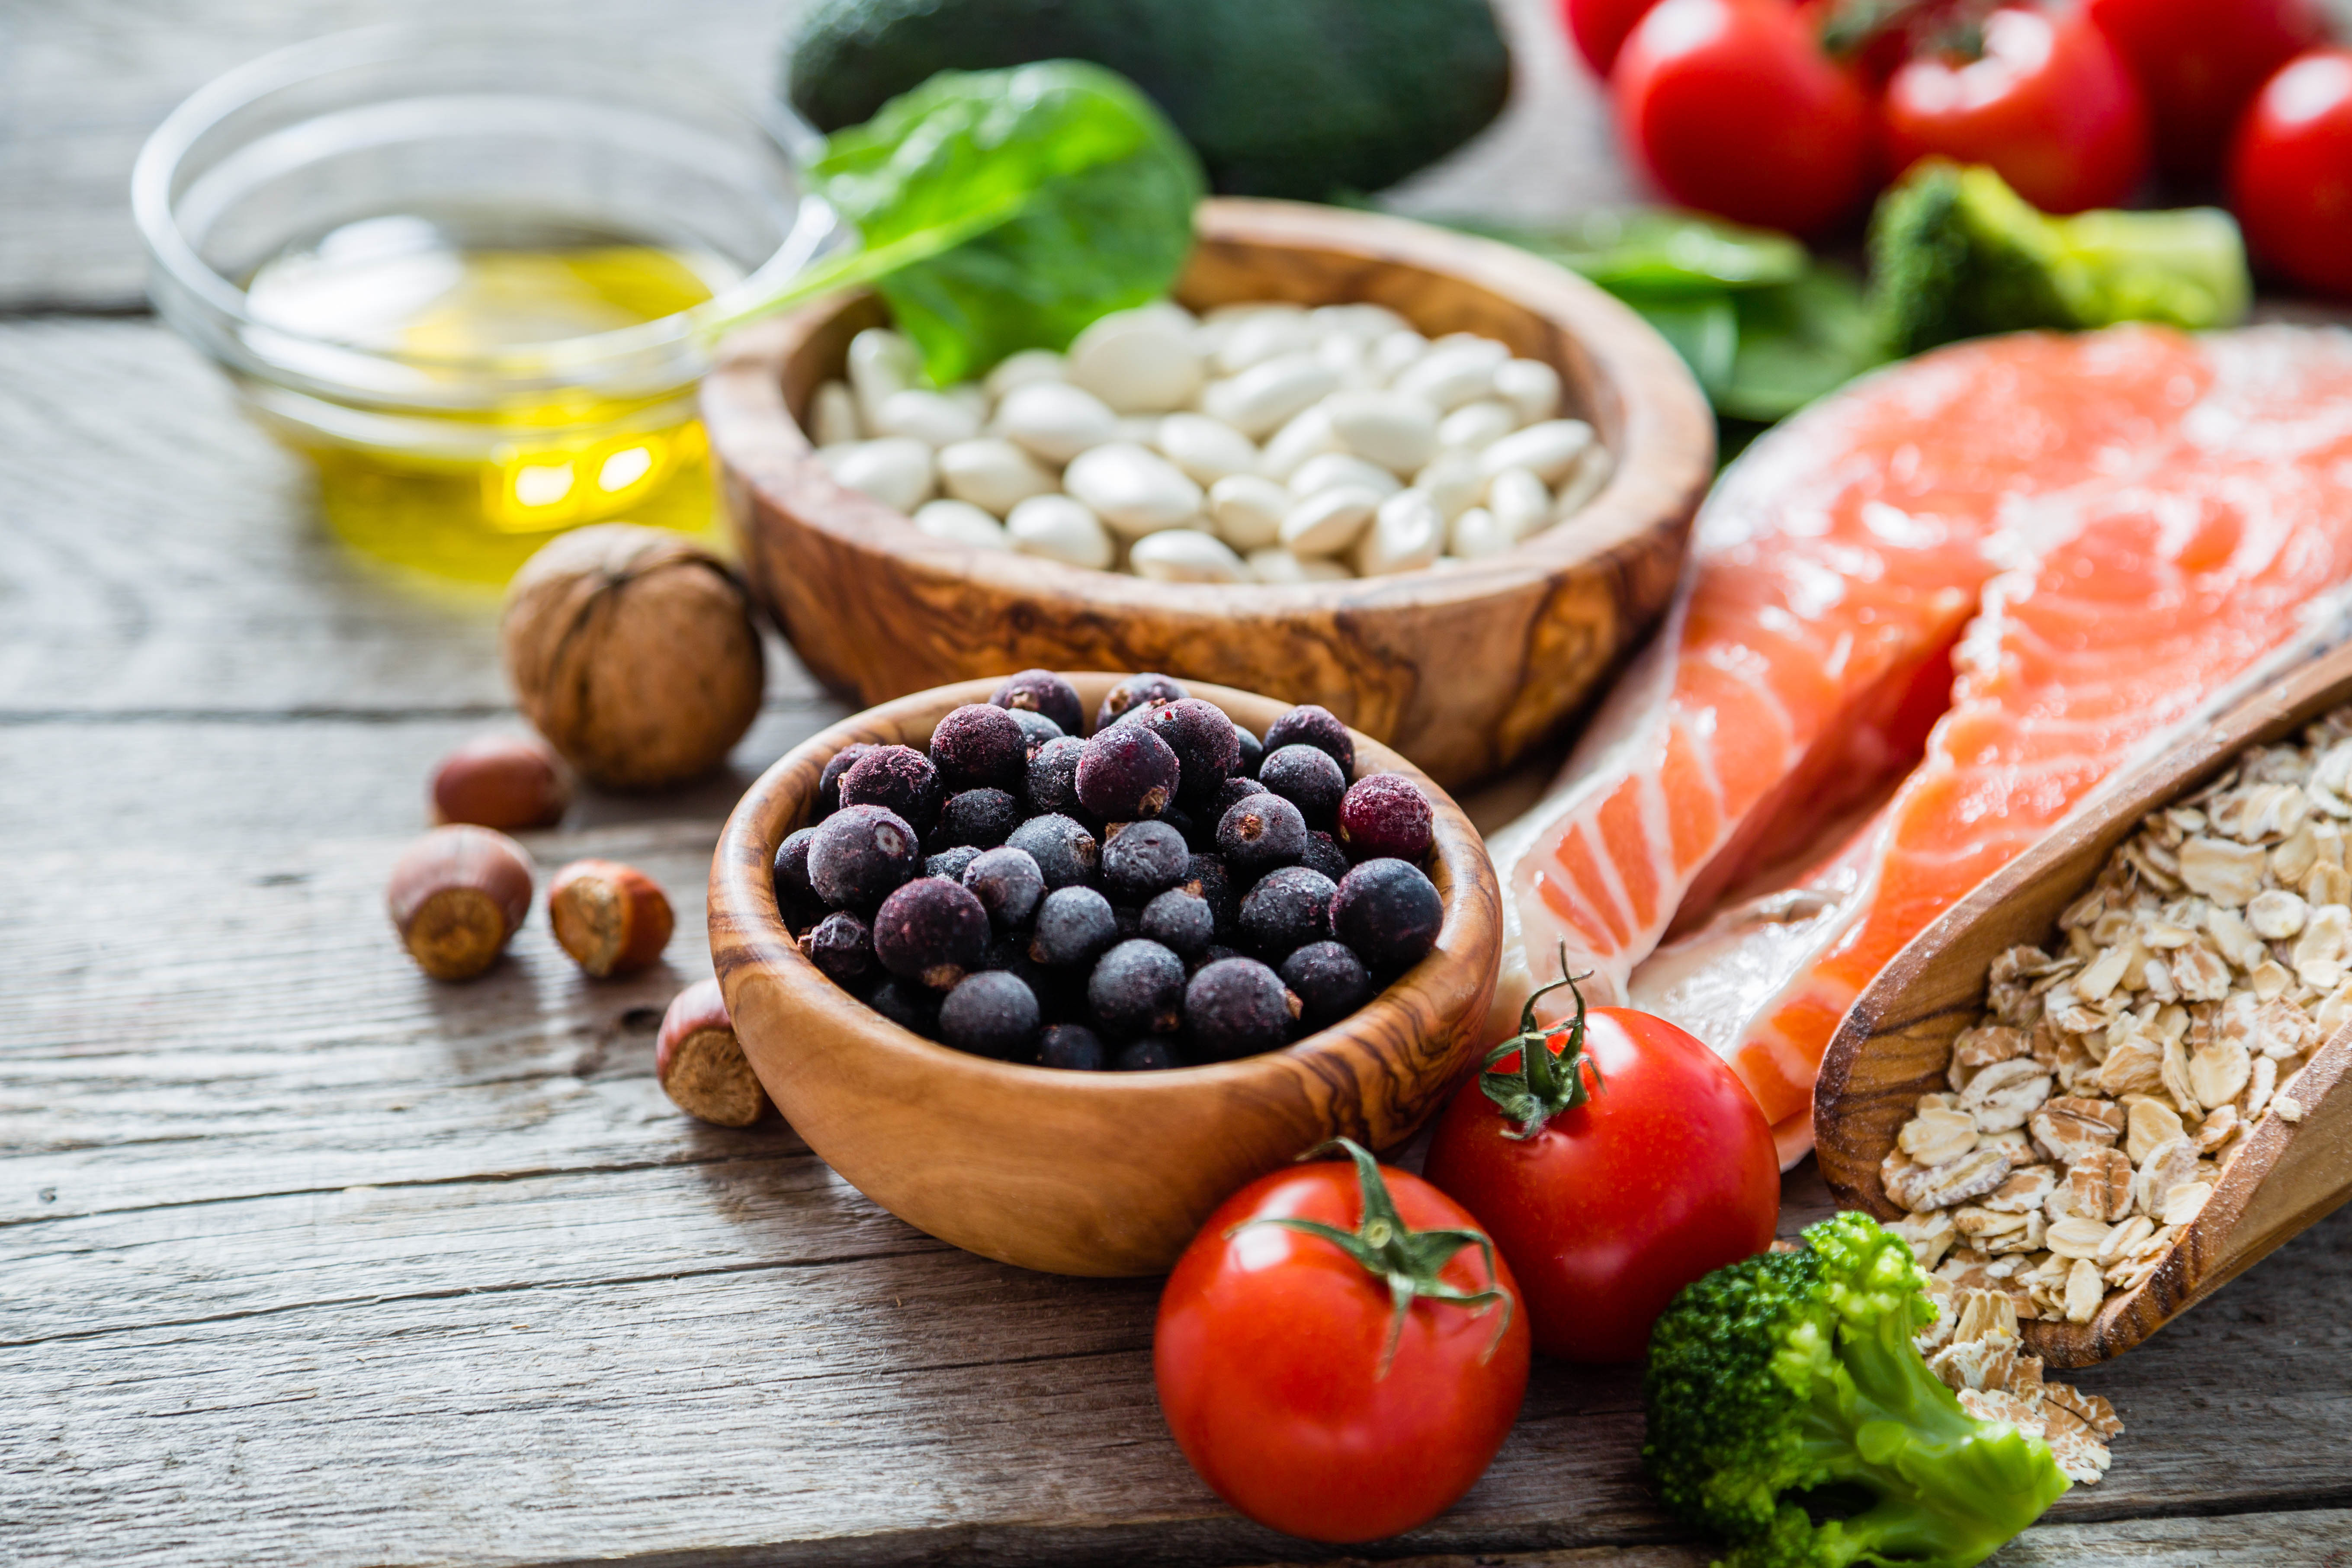 Foods that are part of a healthy diet including - fish, nuts, oils, berries, vegetables, fruit